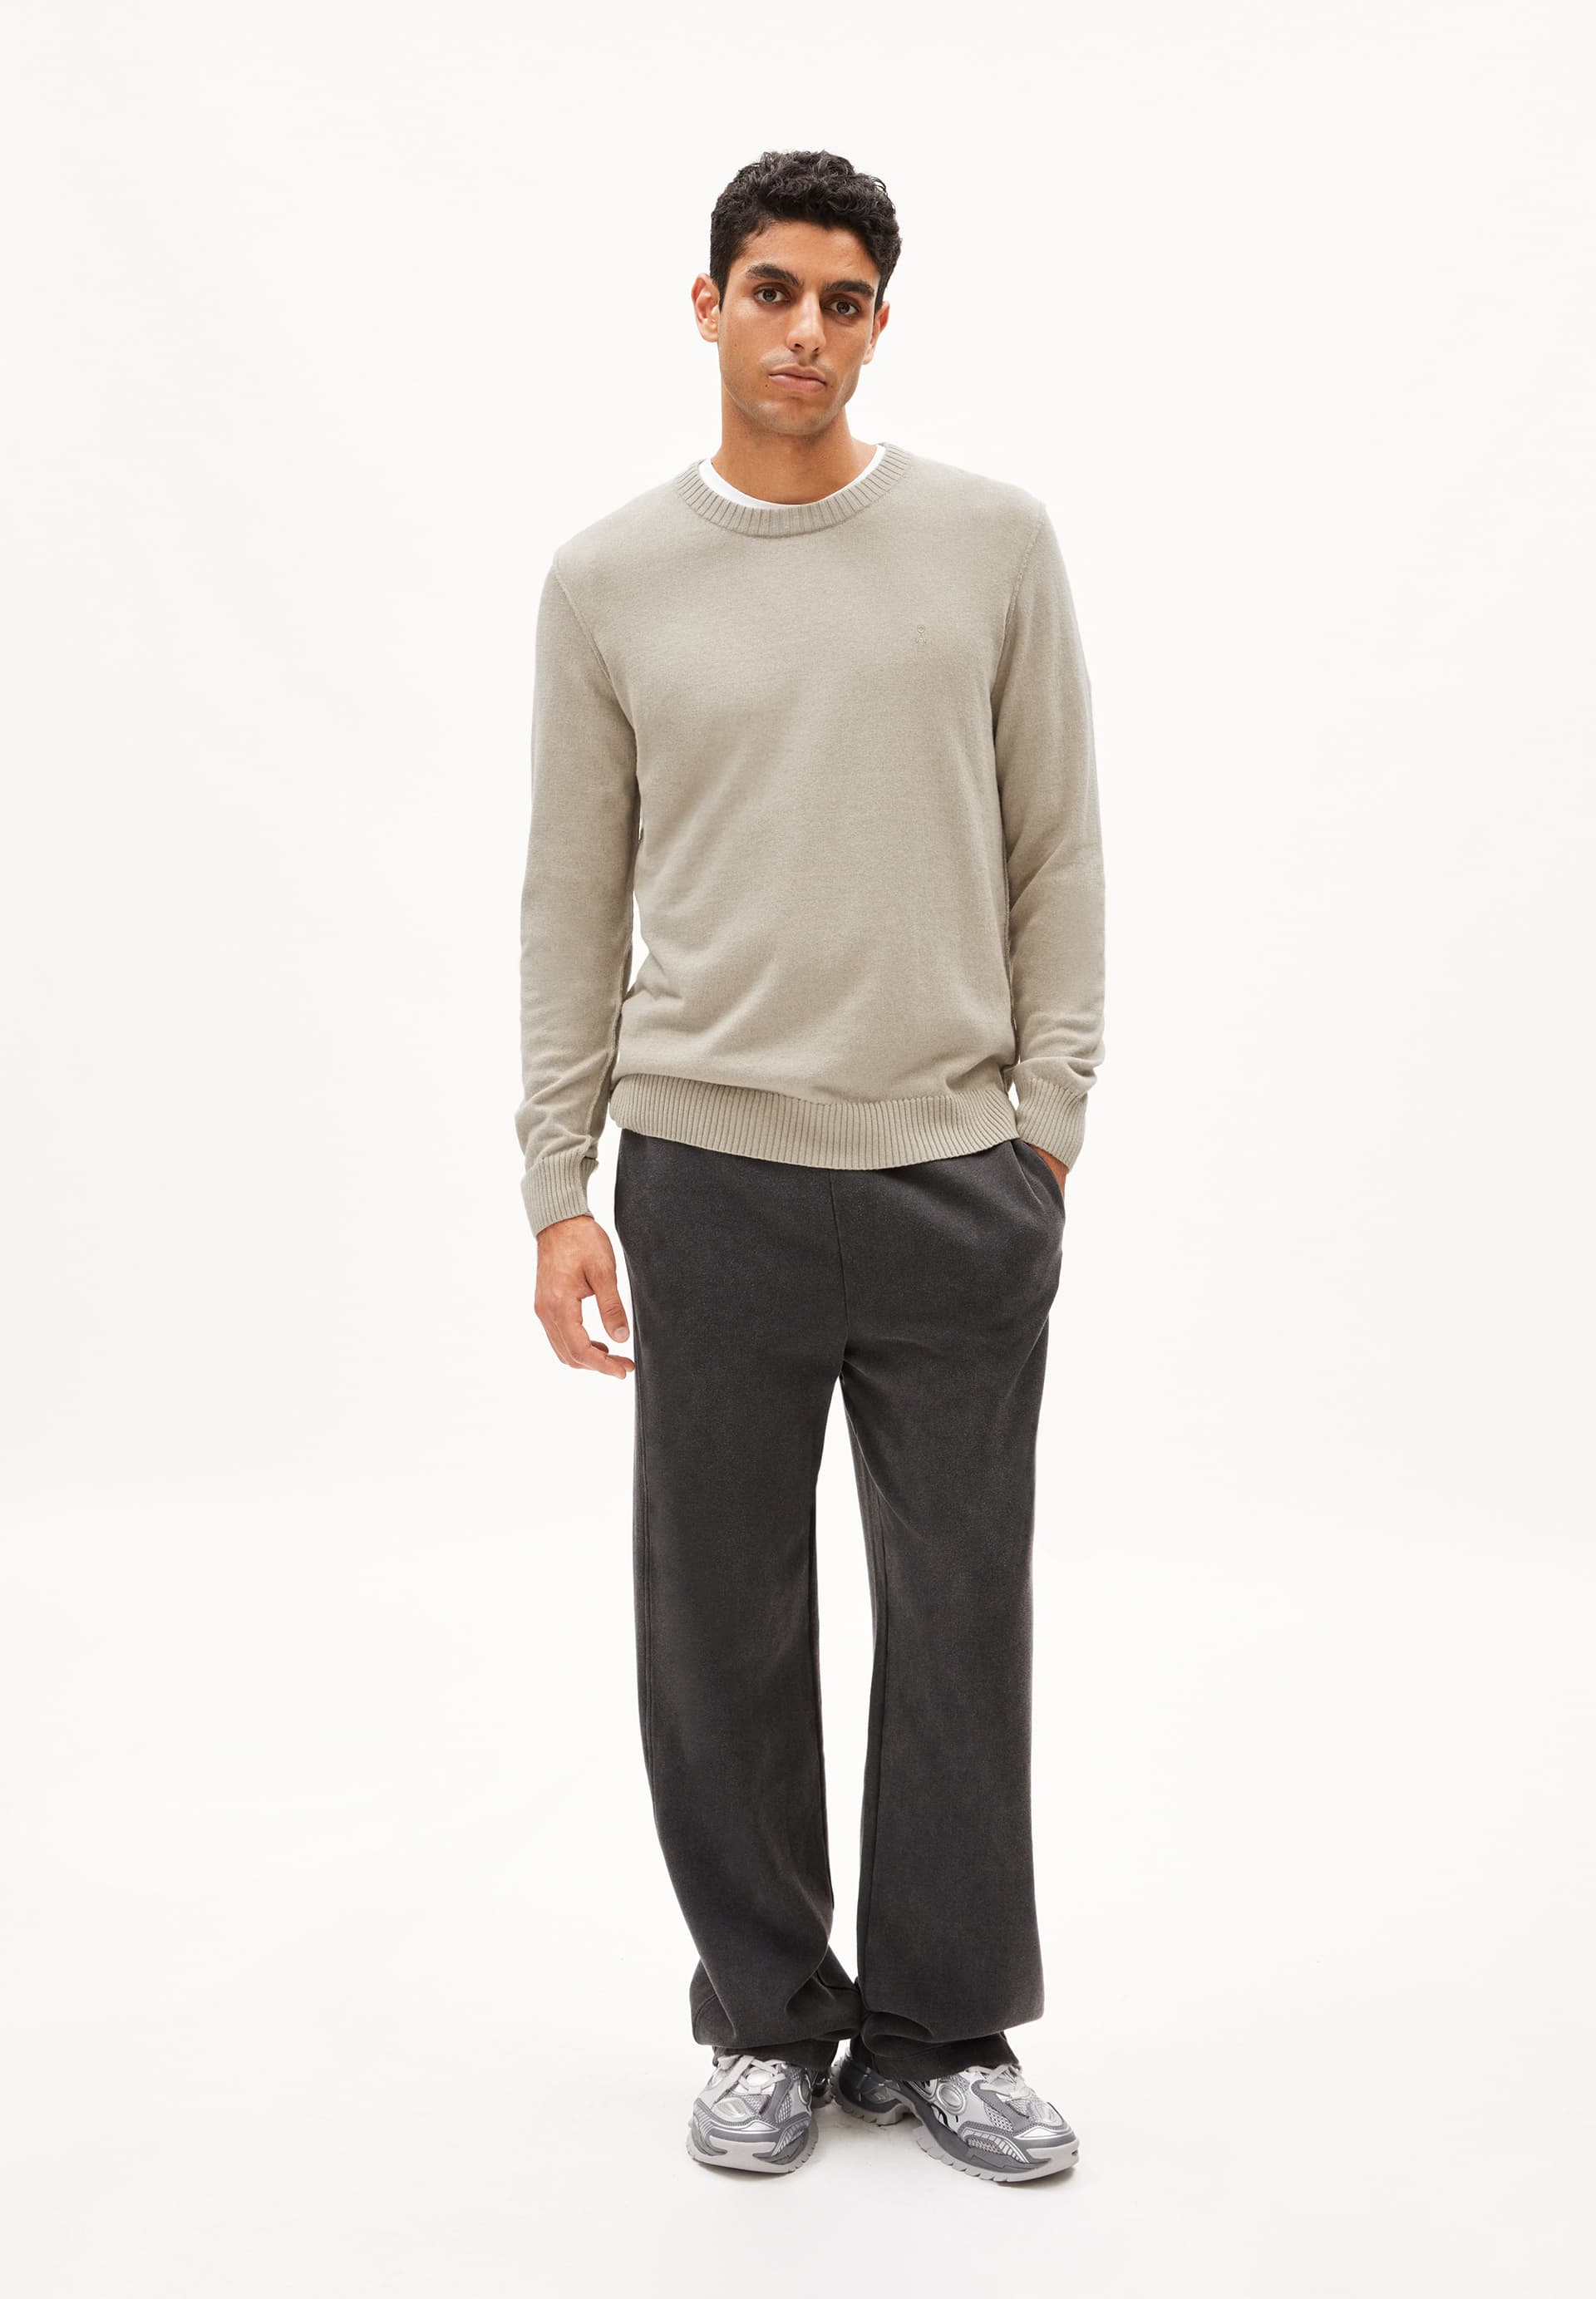 HORAACIOS Sweater Regular Fit made of Organic Wool Mix